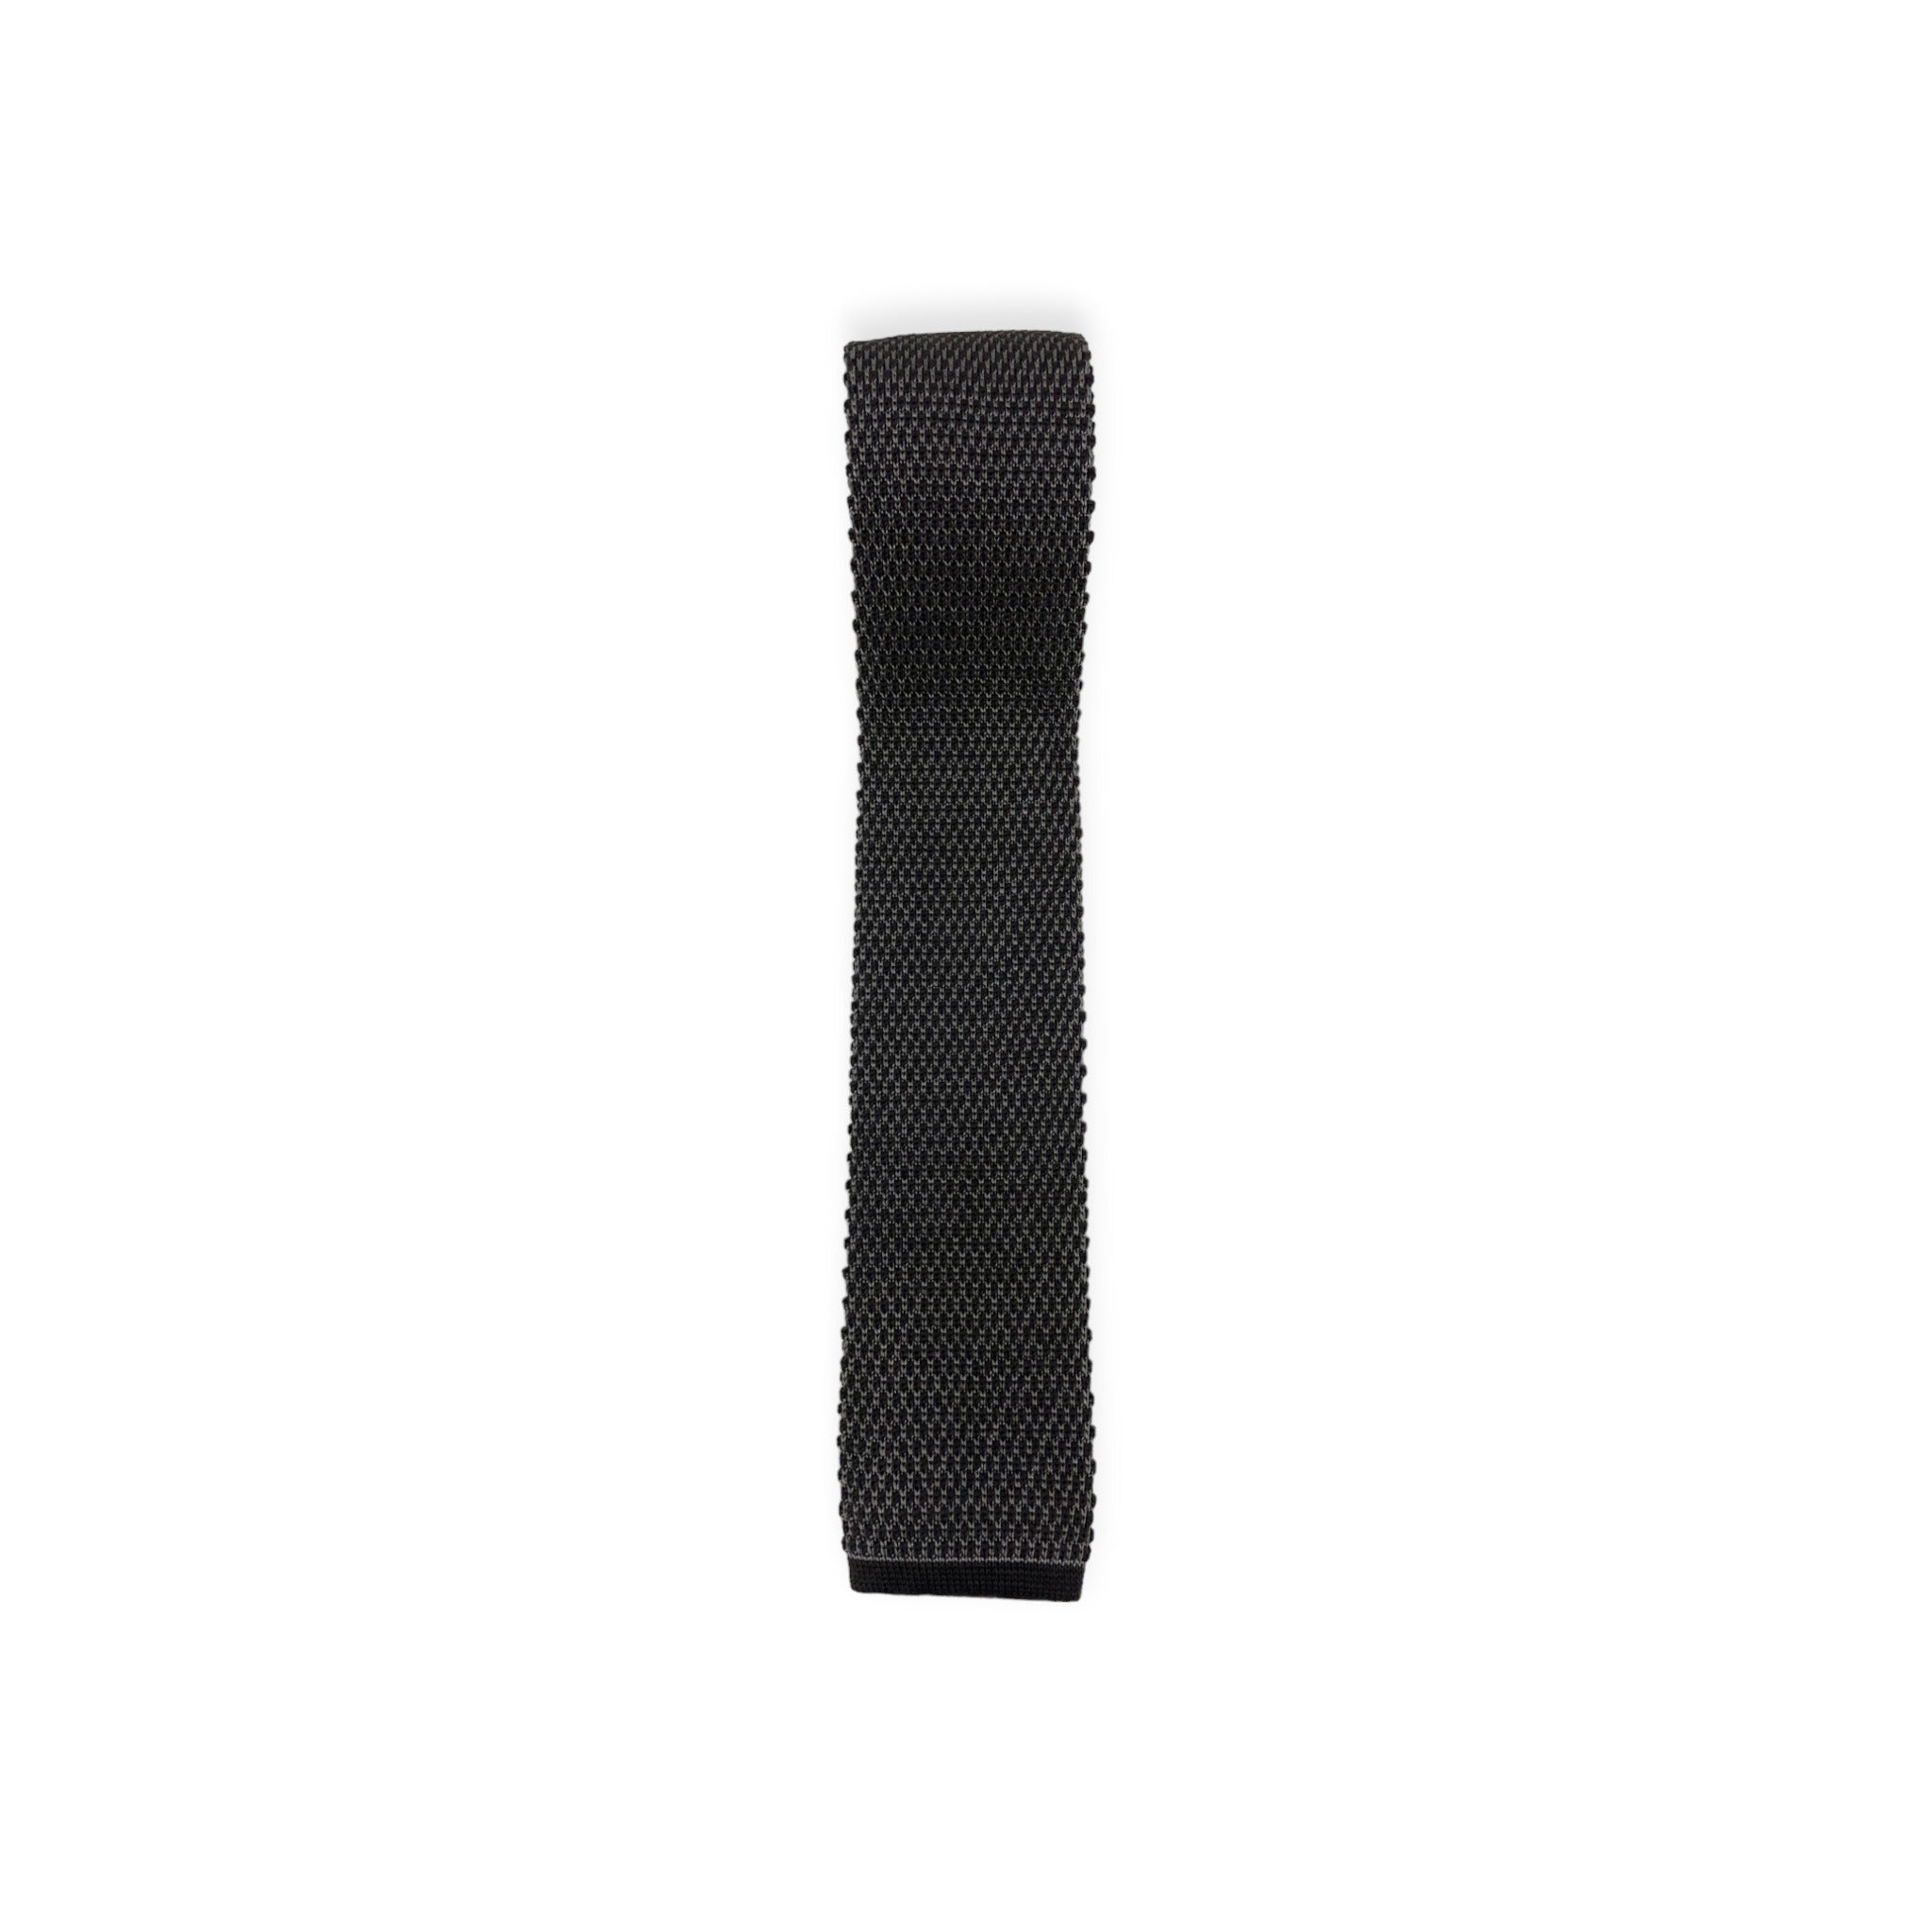 Top down view of black Brioni knit tricot tie with one side rolled